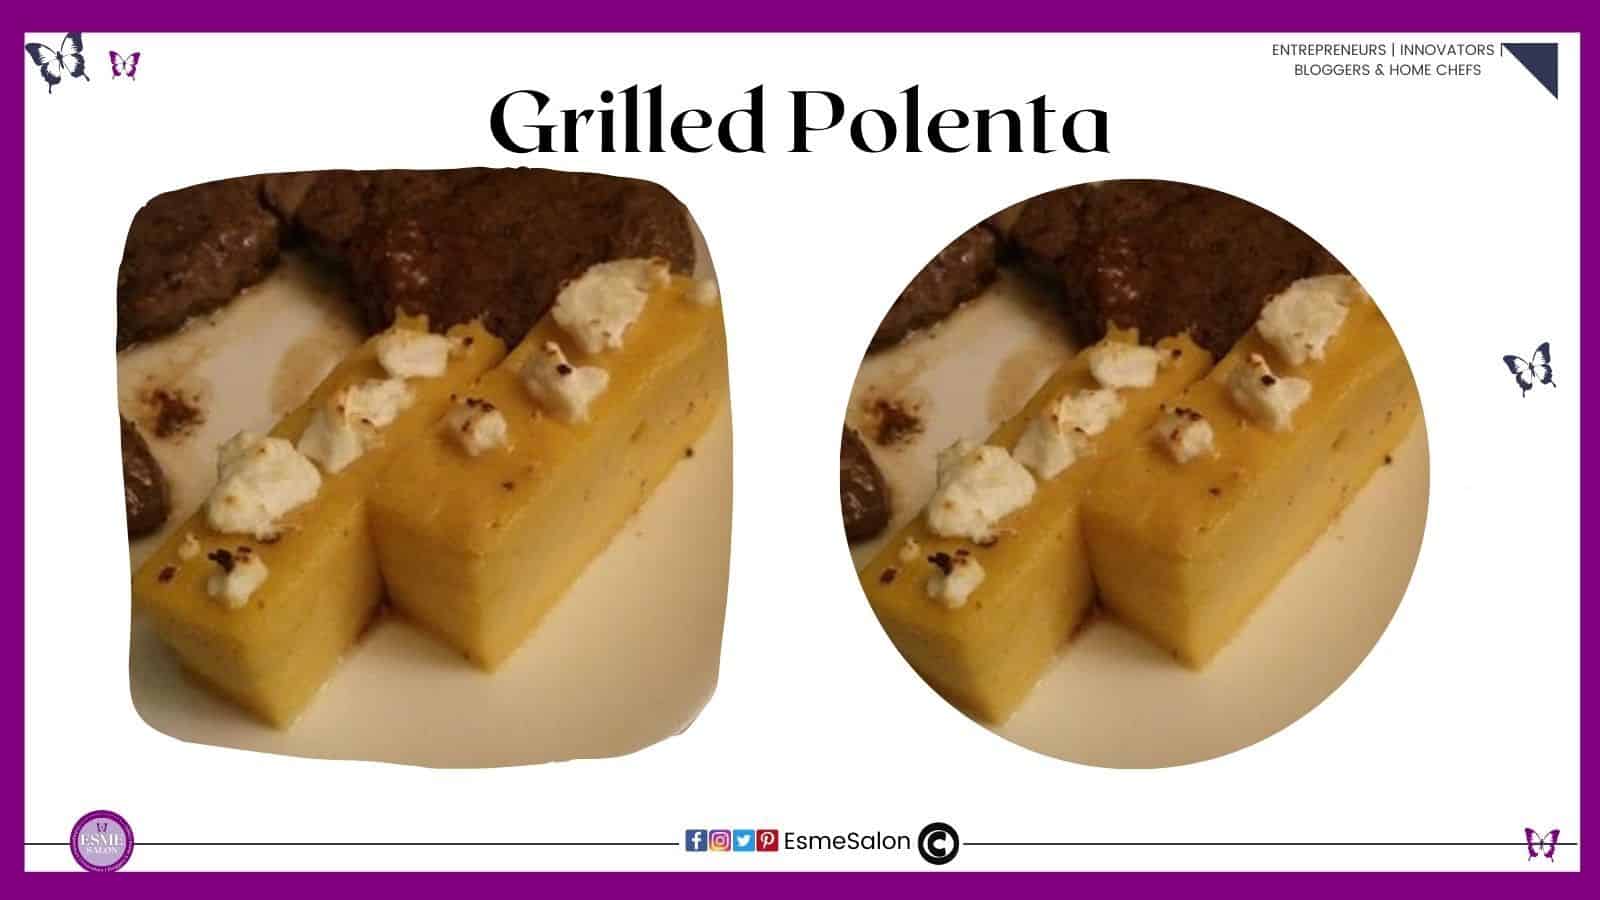 an image of 2 blocks of Polenta with grilled cheese